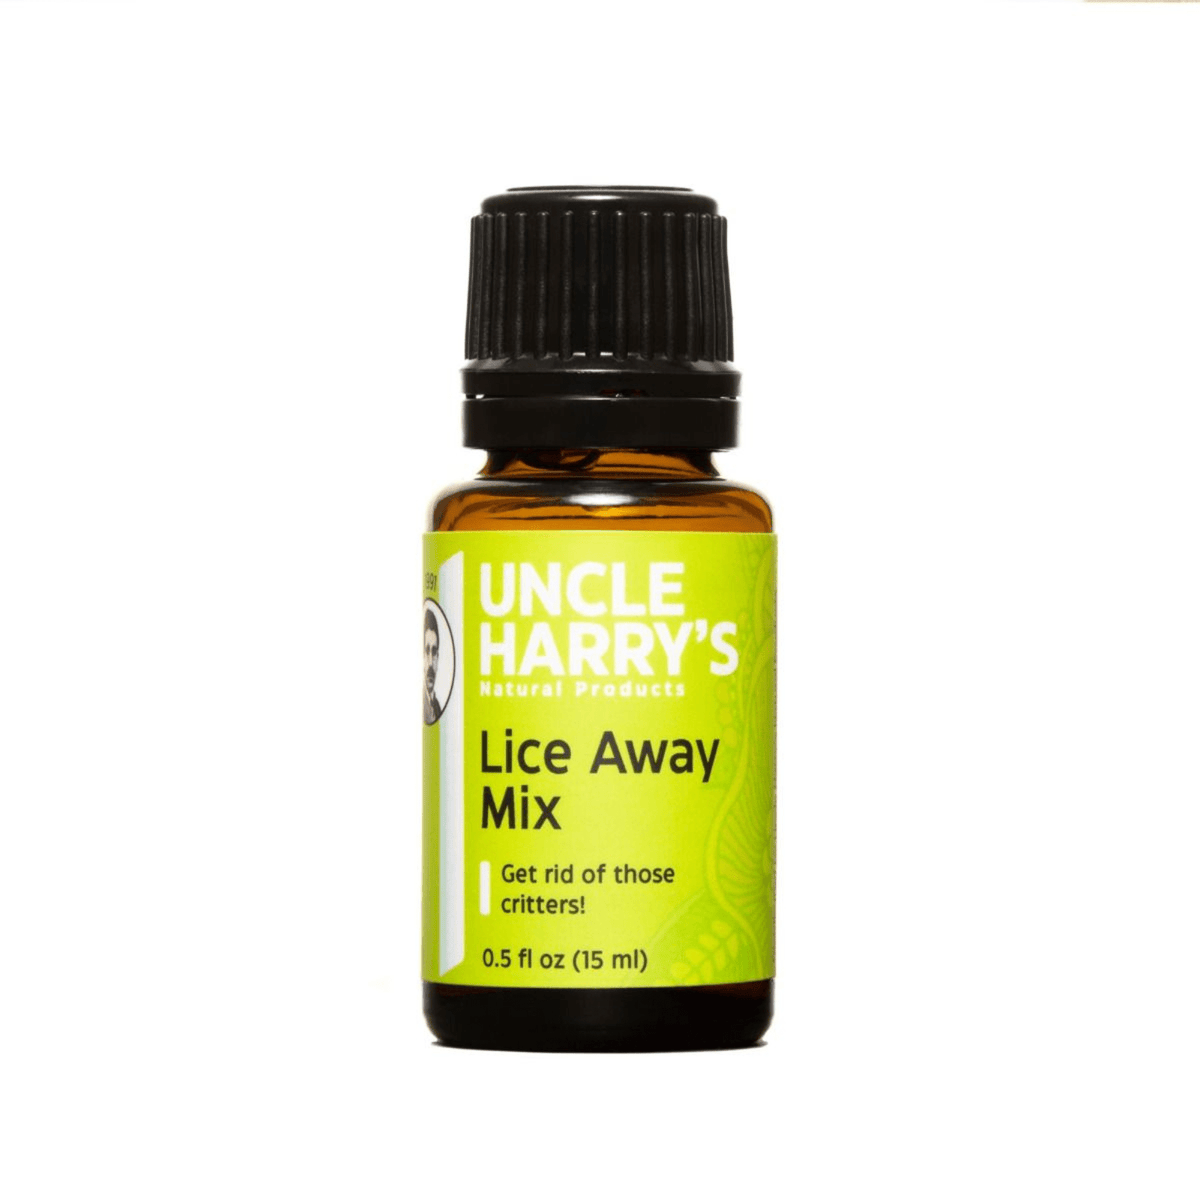 Primary Image of Lice Away Mix